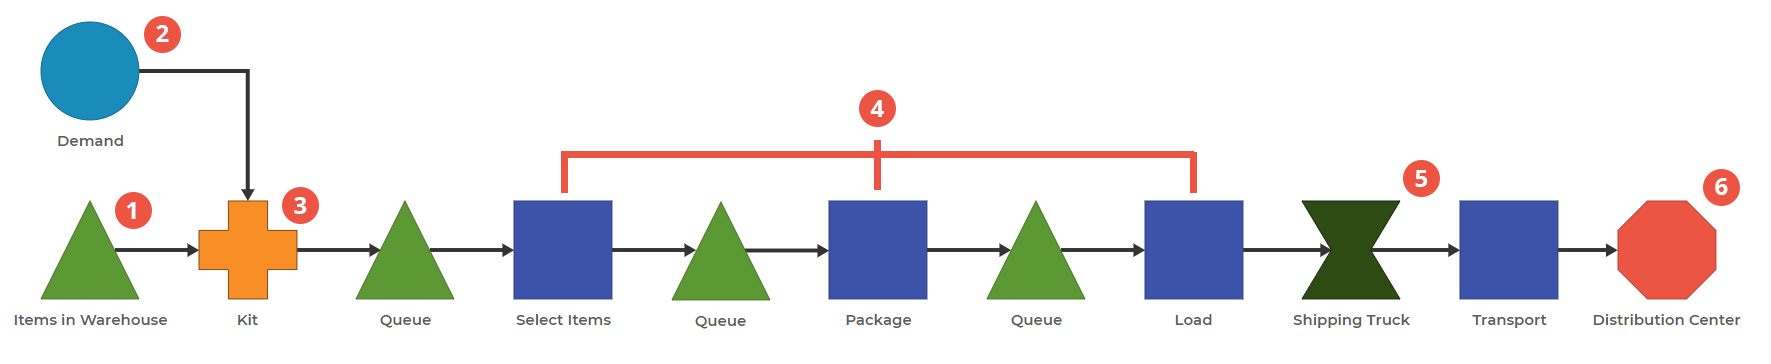 Process Playground model showing Demand, and Queue going into a Kit Block, Queue, Activity, Queue, Activity, Queue, Activity, Flexibatch, Activity, Exit